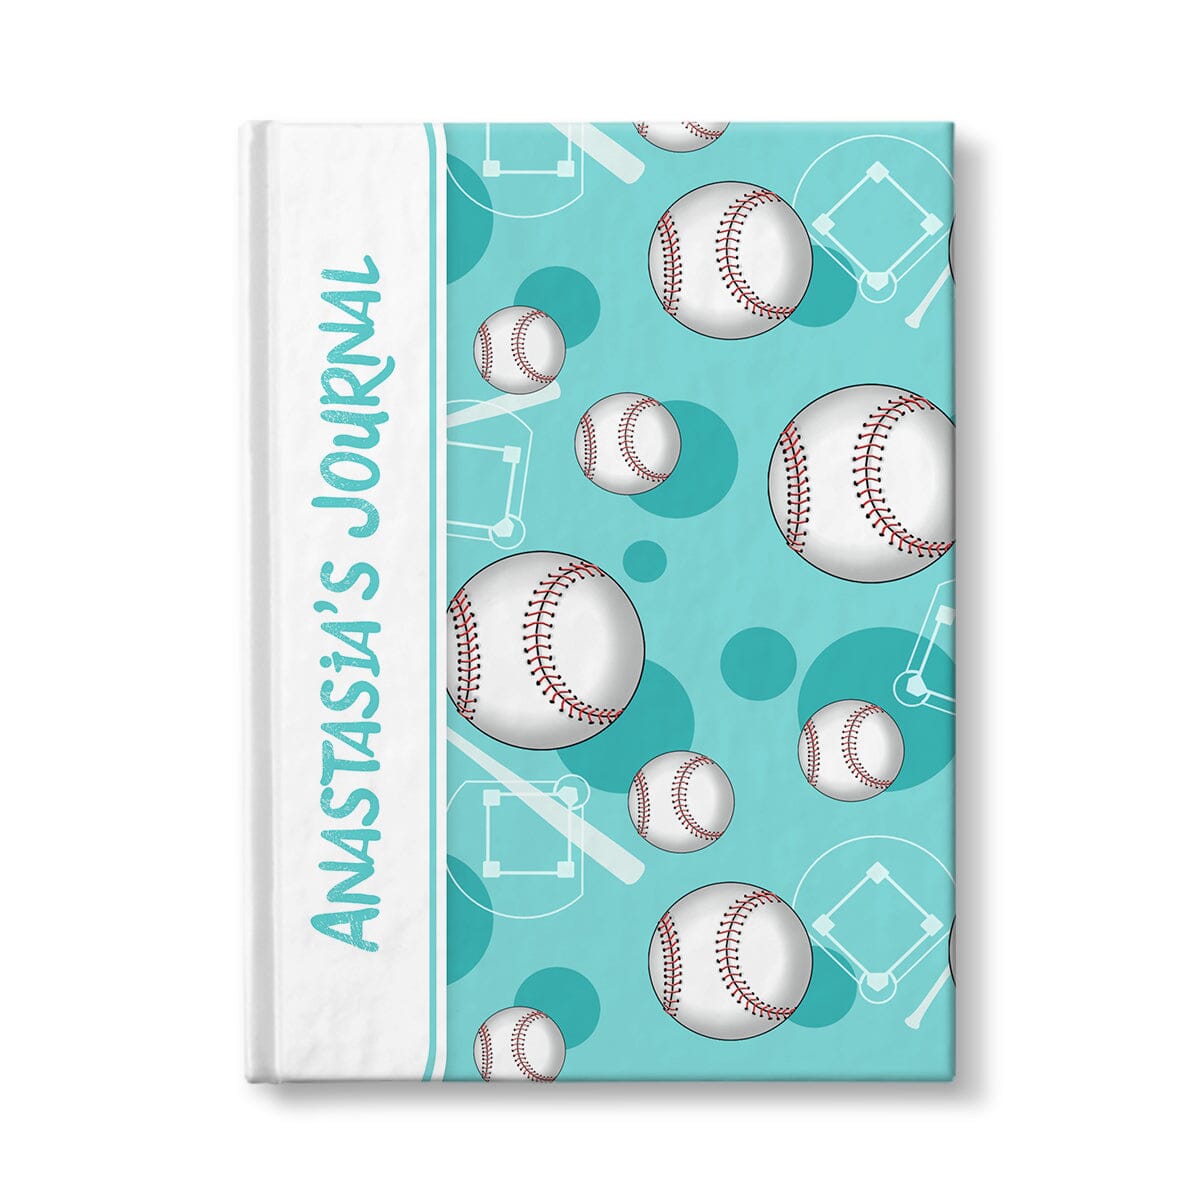 Personalized Teal Baseball Journal at Artistically Invited.